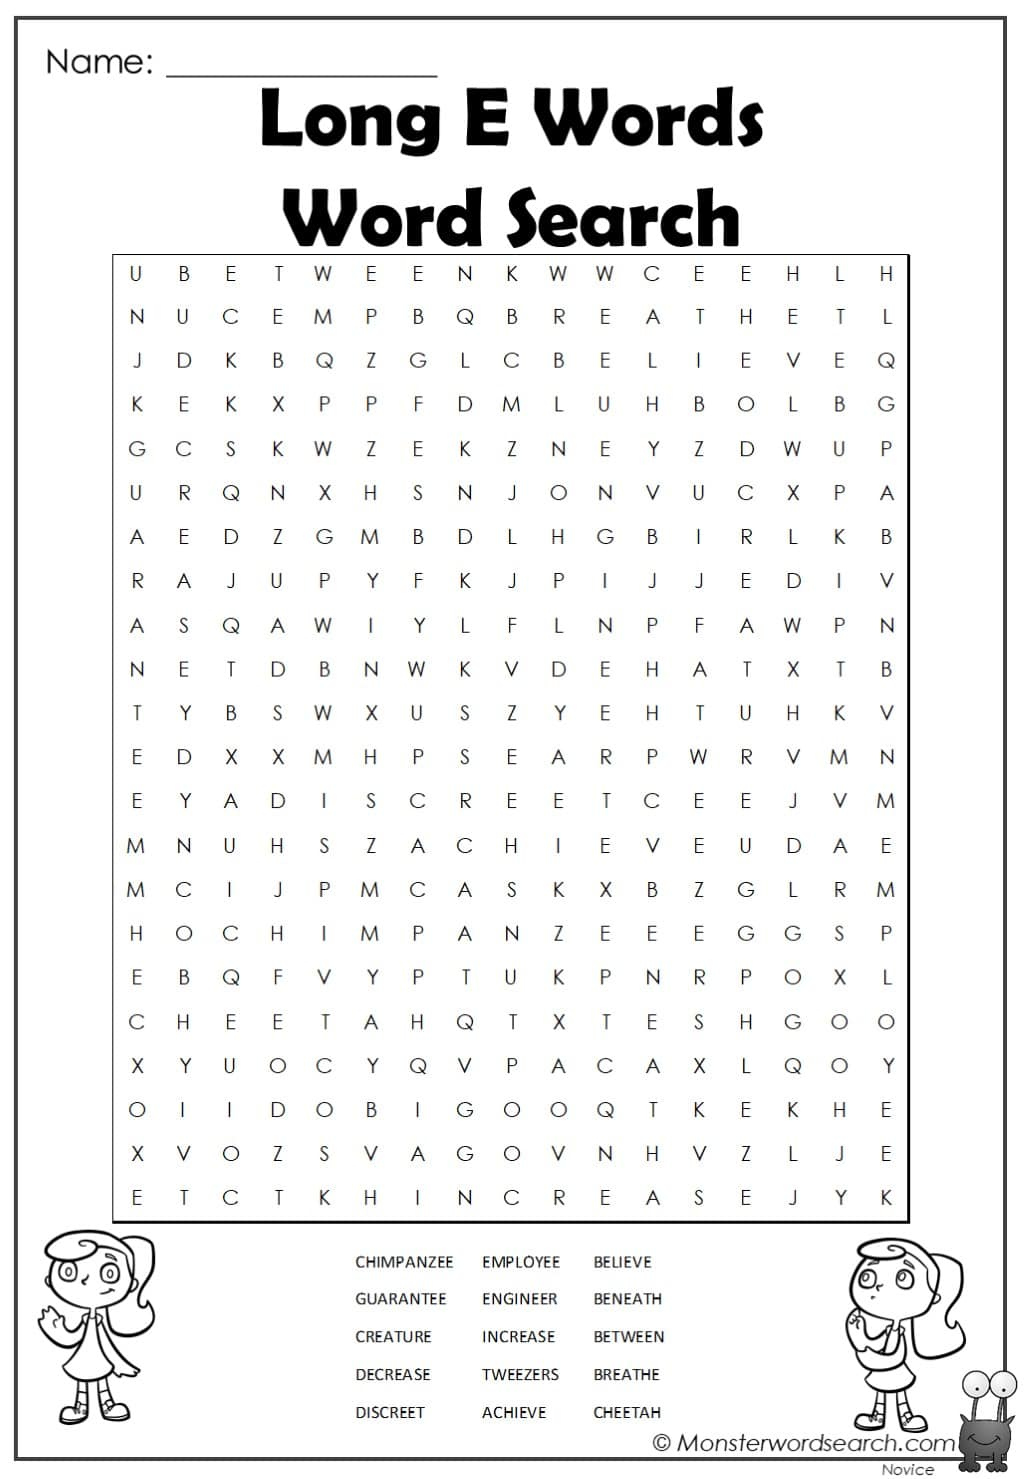 Long E Words Word Search Monster Word Search